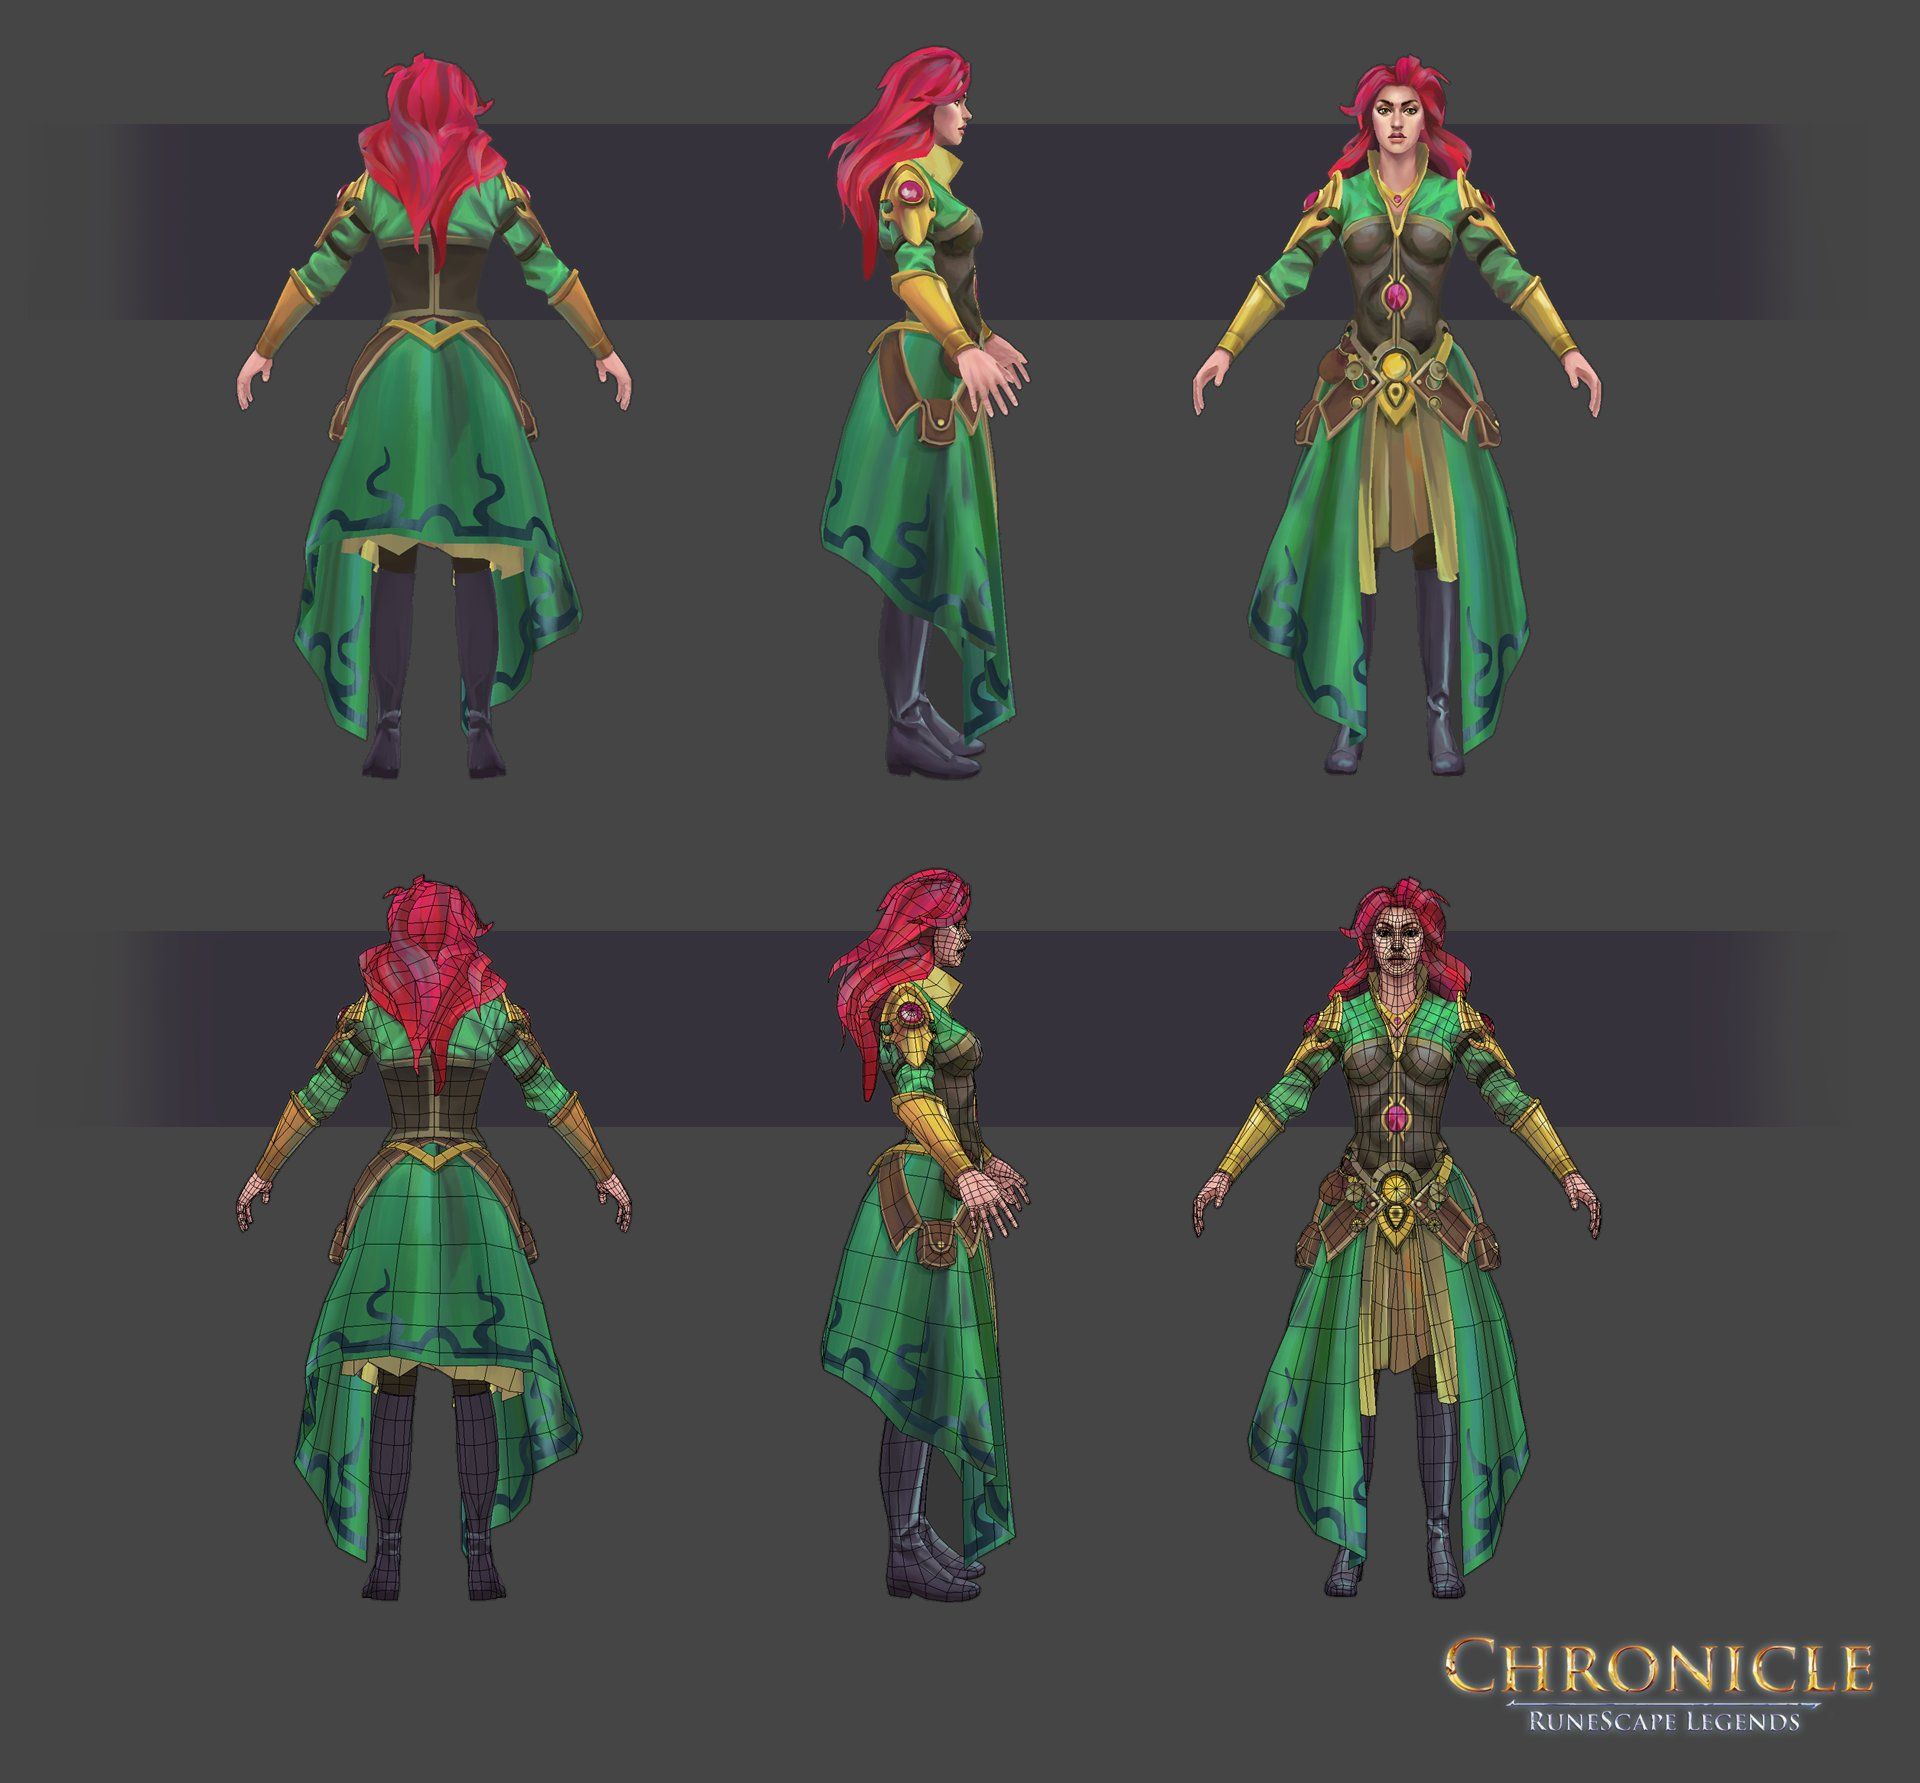 Chronicle: RuneScape Legends Wallpapers